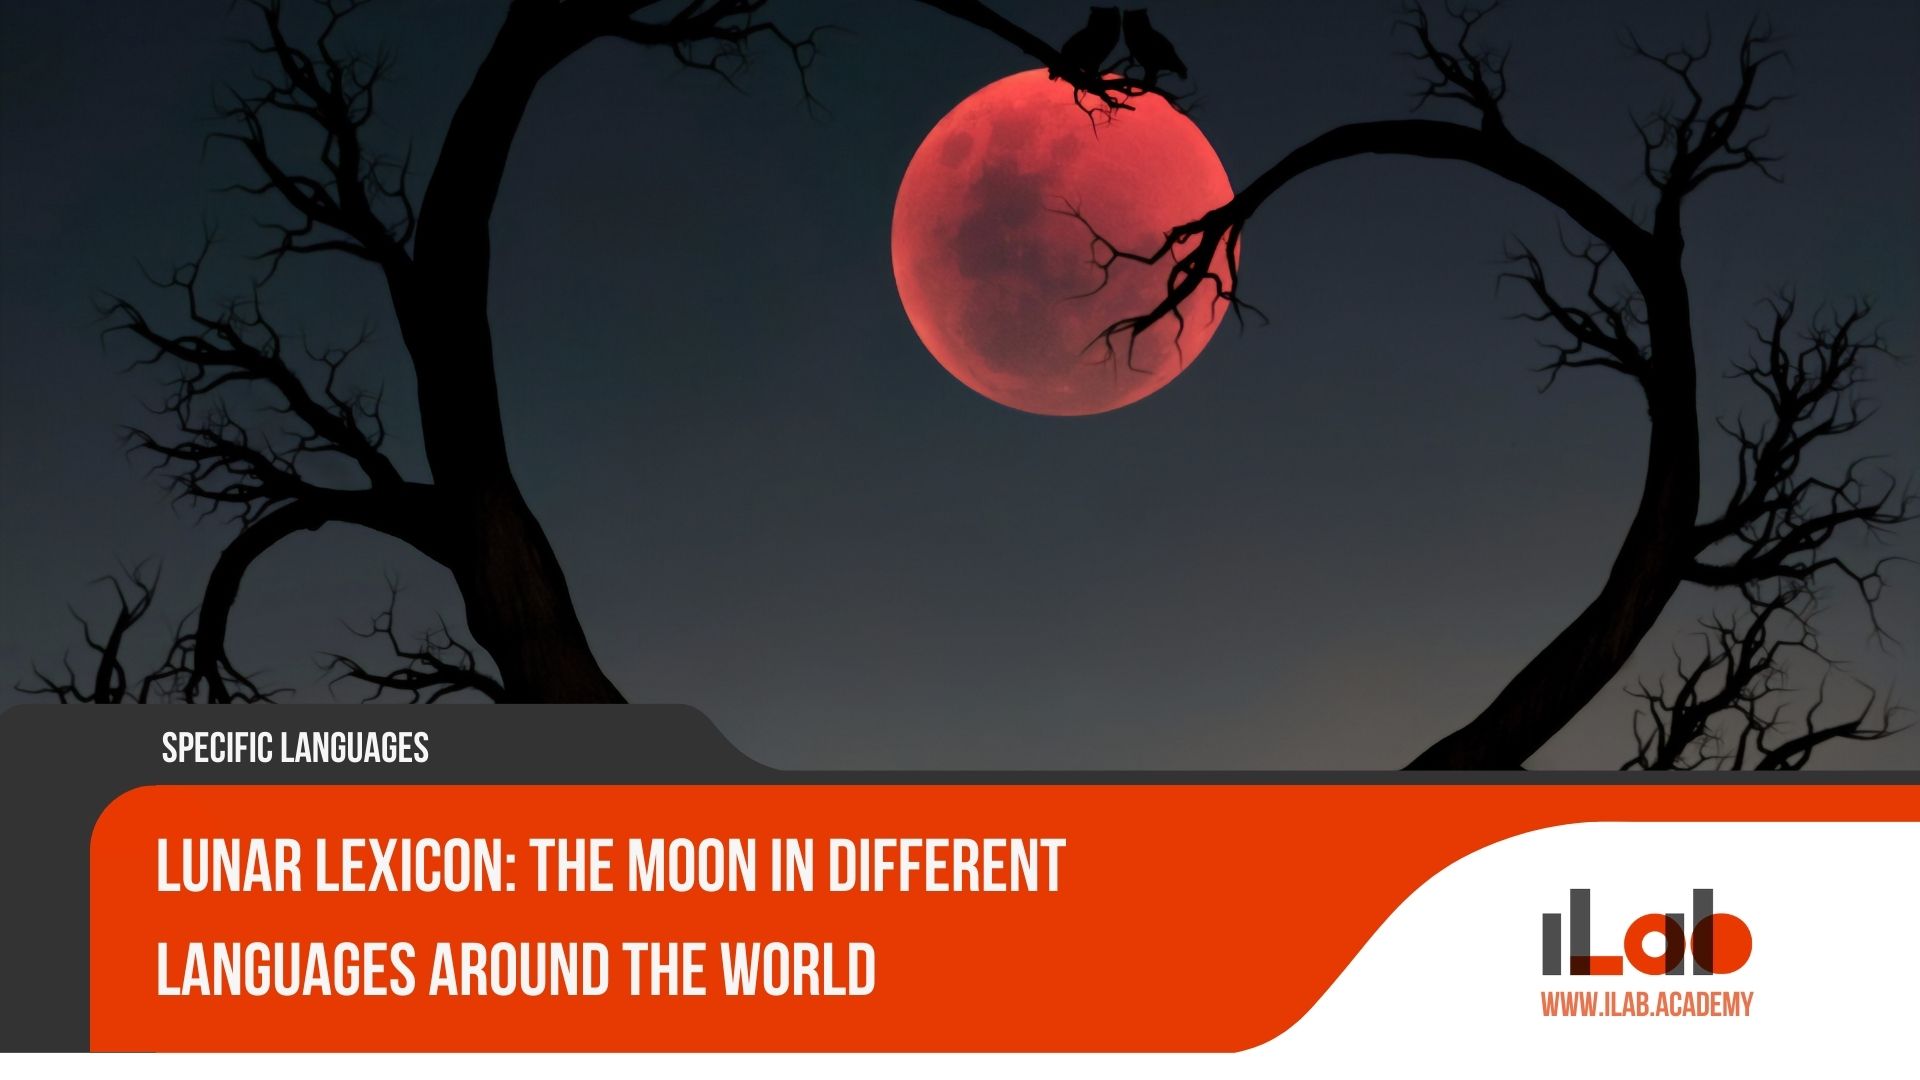 Lunar Lexicon: The Moon in Different Languages Around the World